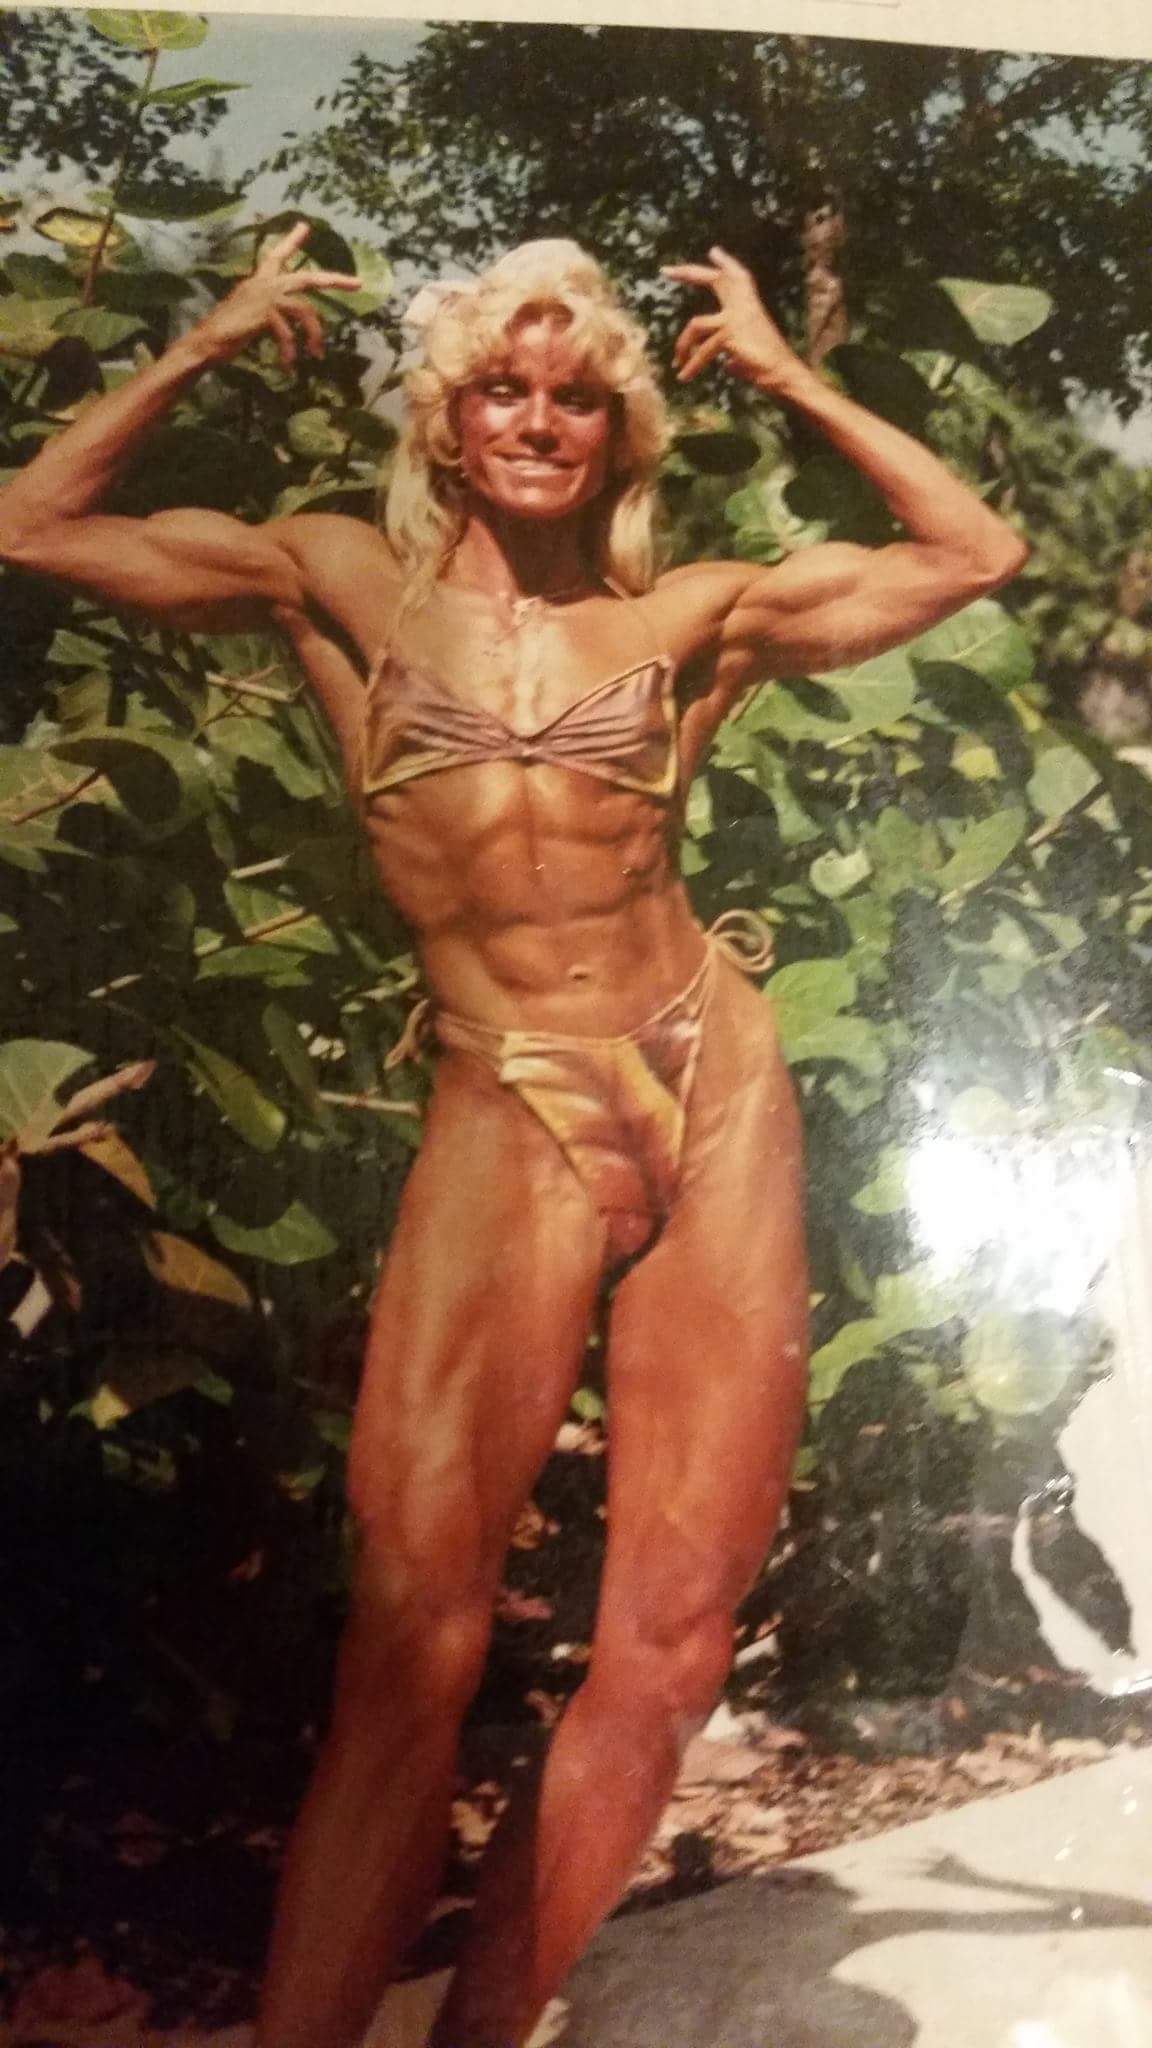 Jennifer placed 5th in the NPC National Bodybuilding Competition